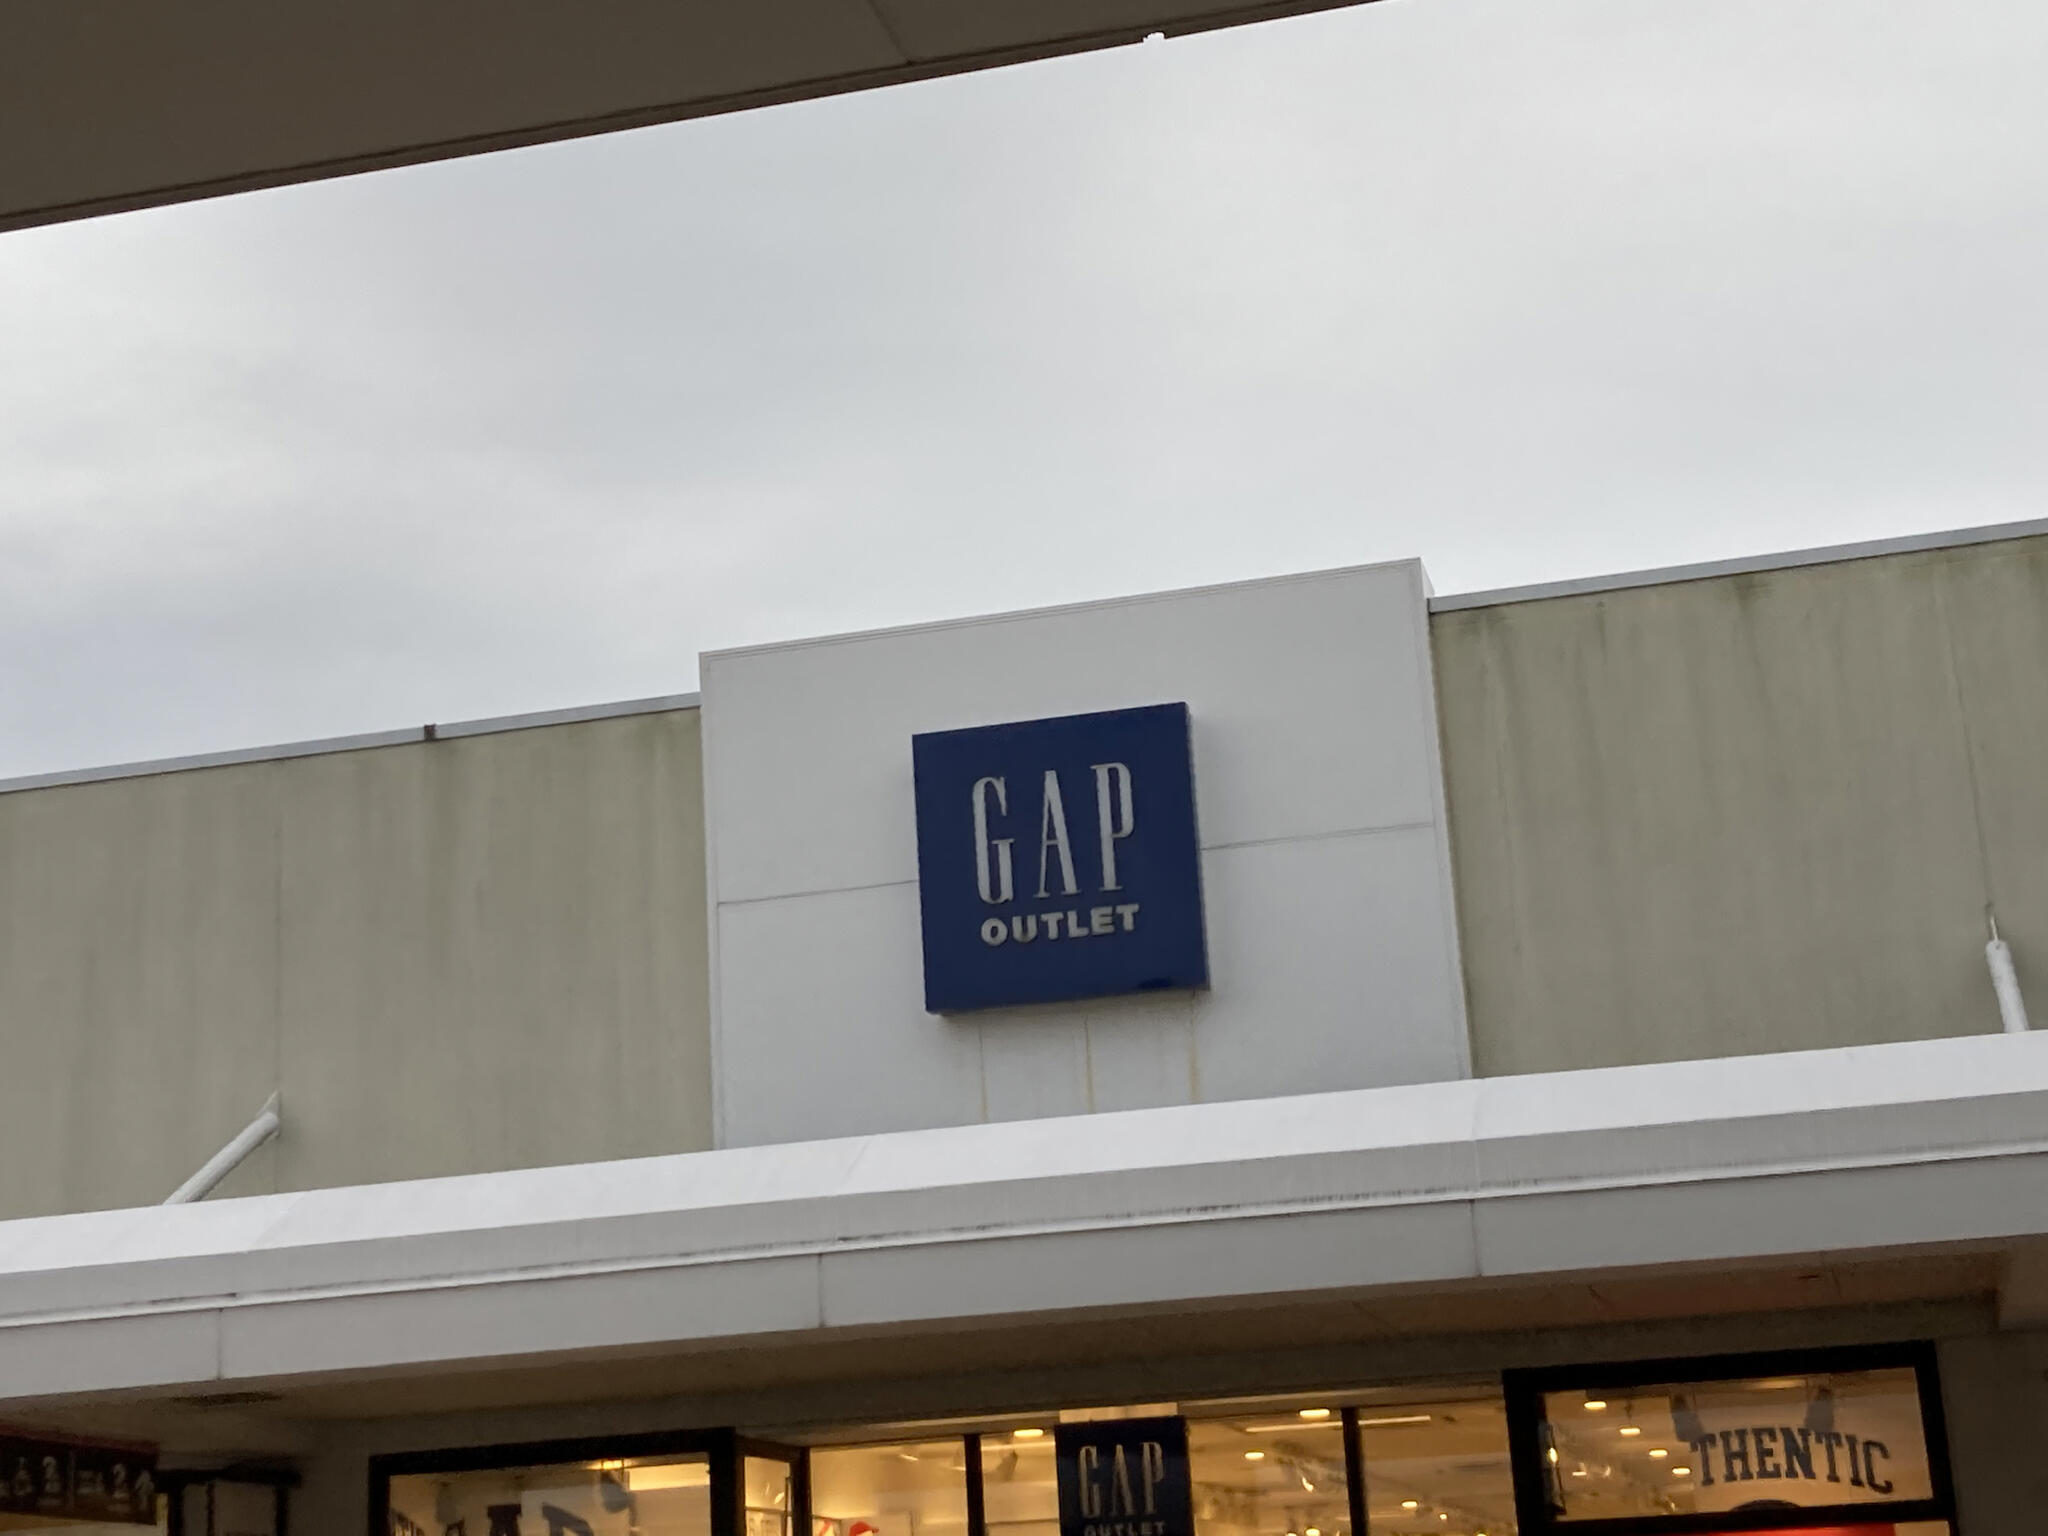 GAP Outlet 三井アウトレットパーク木更津店の代表写真6